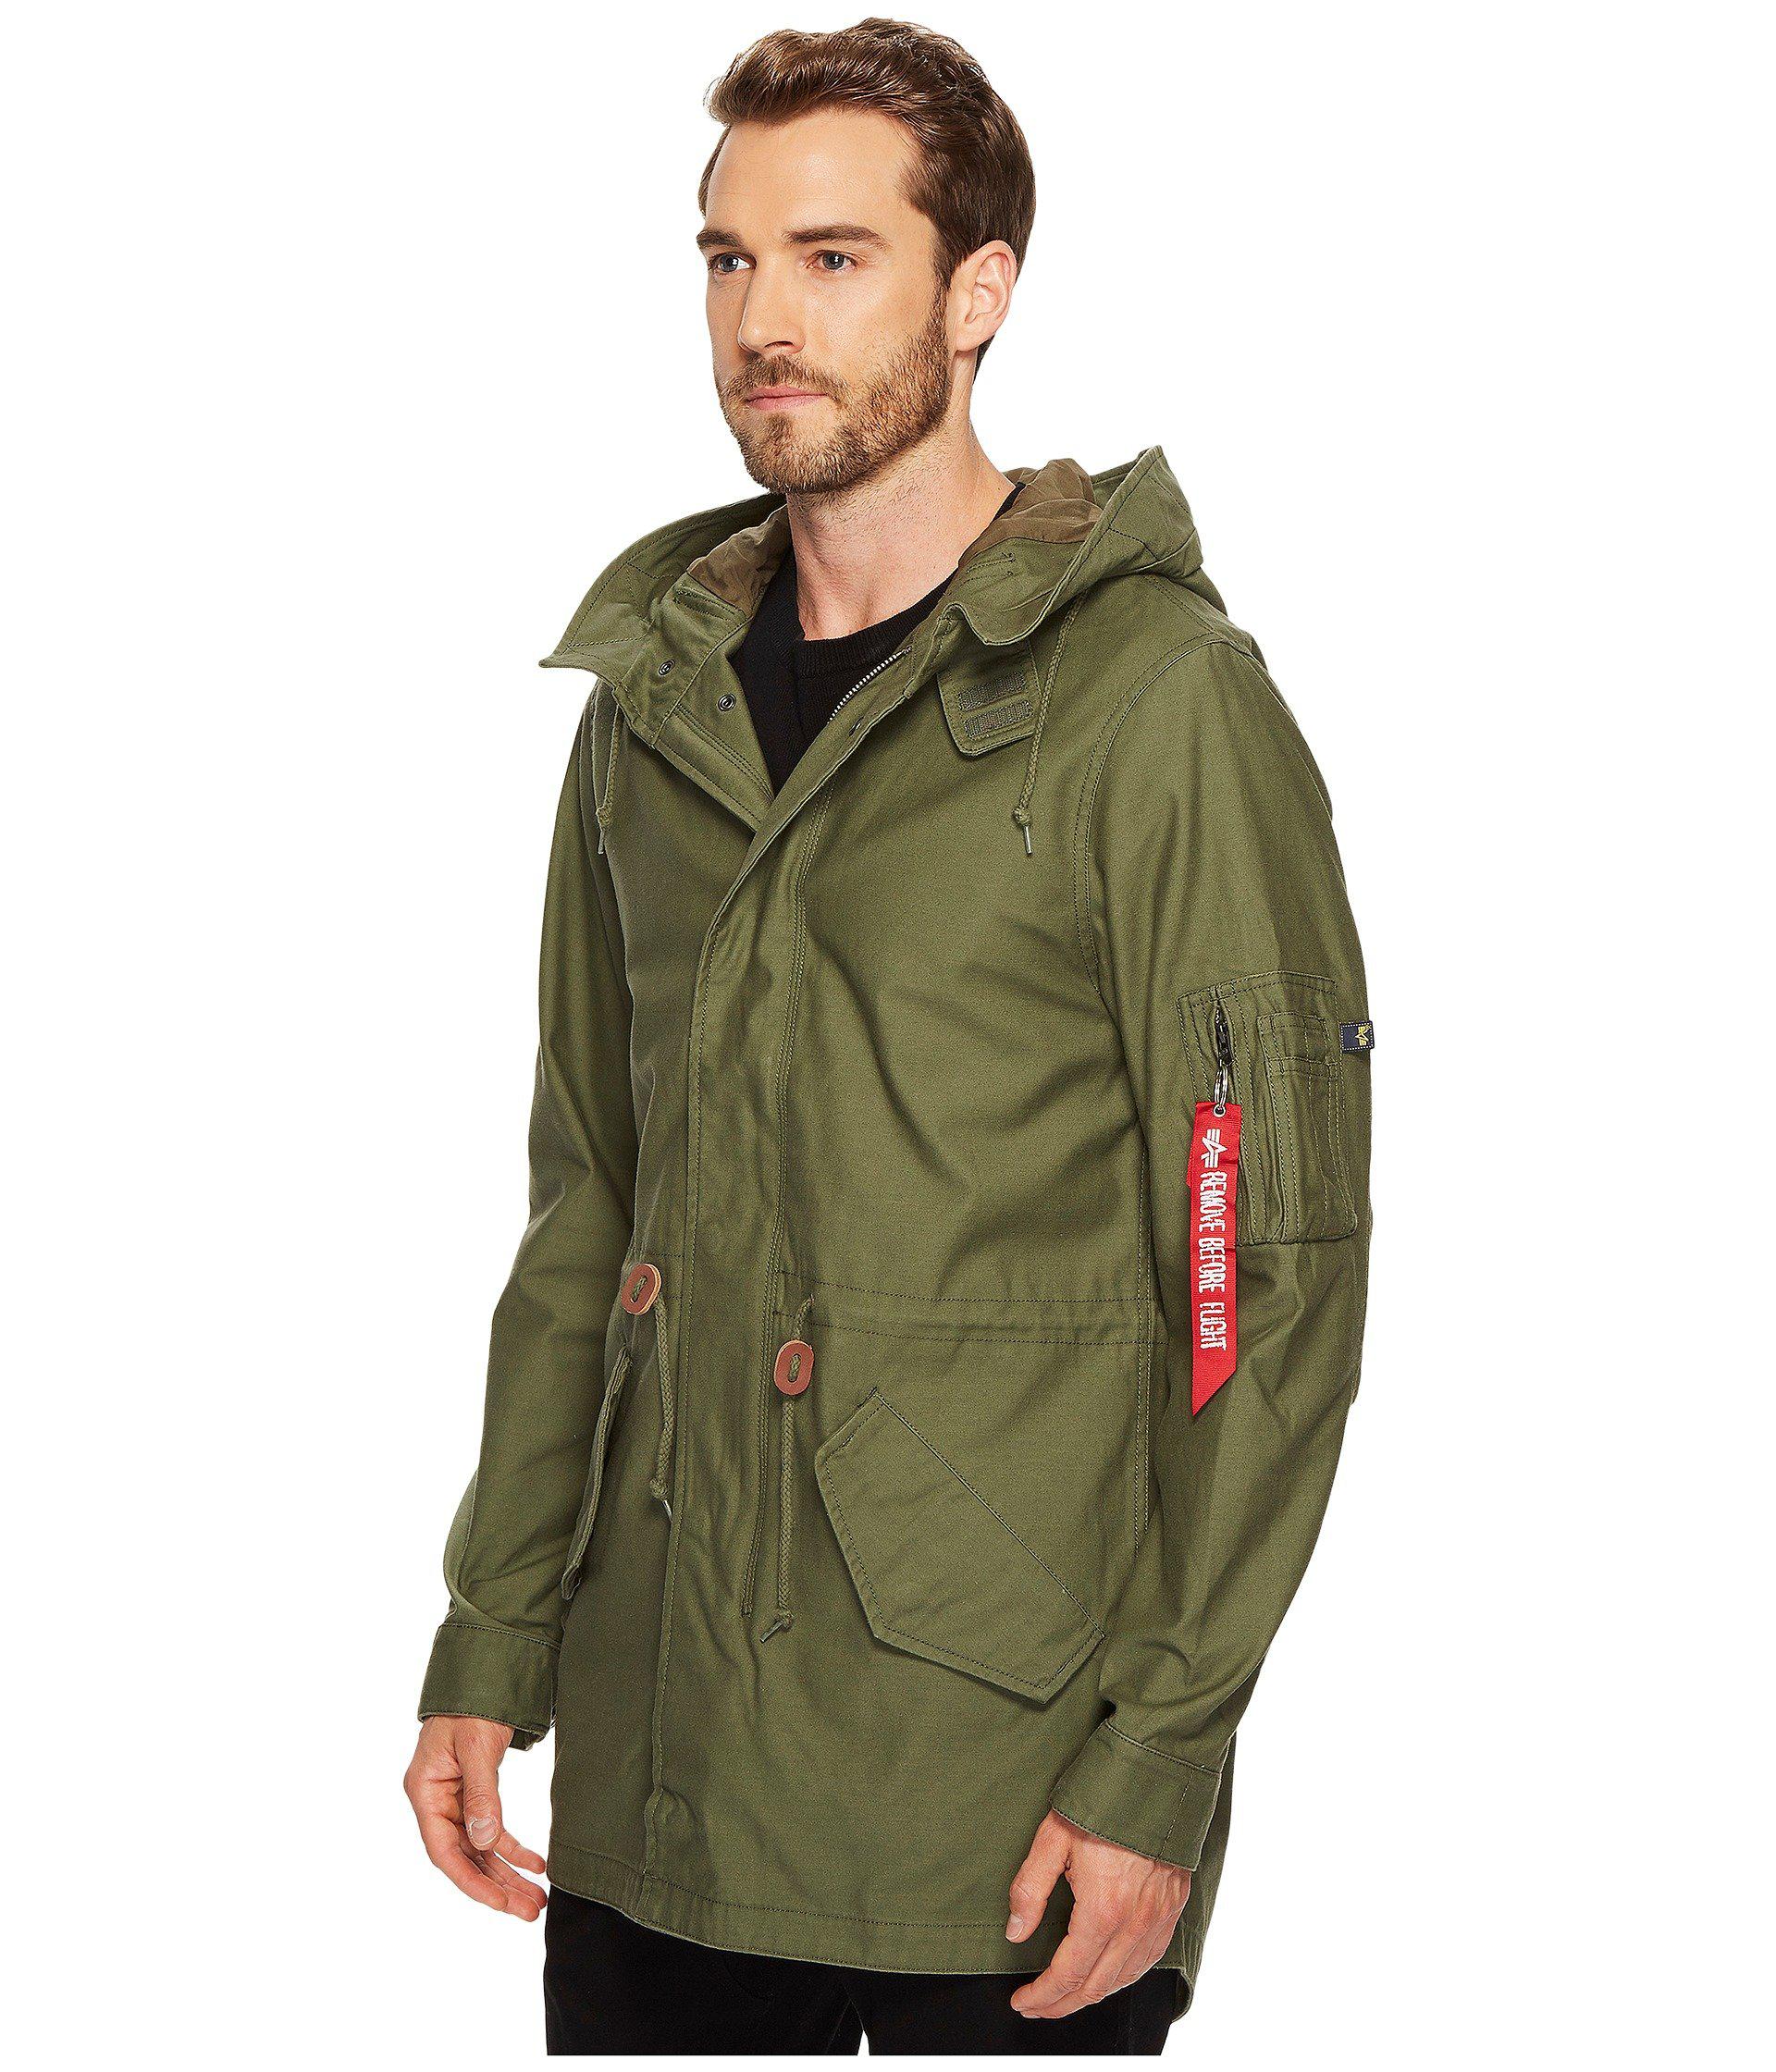 Alpha Industries Cotton M-59 Fishtail Coat in Olive (Green) for Men - Lyst